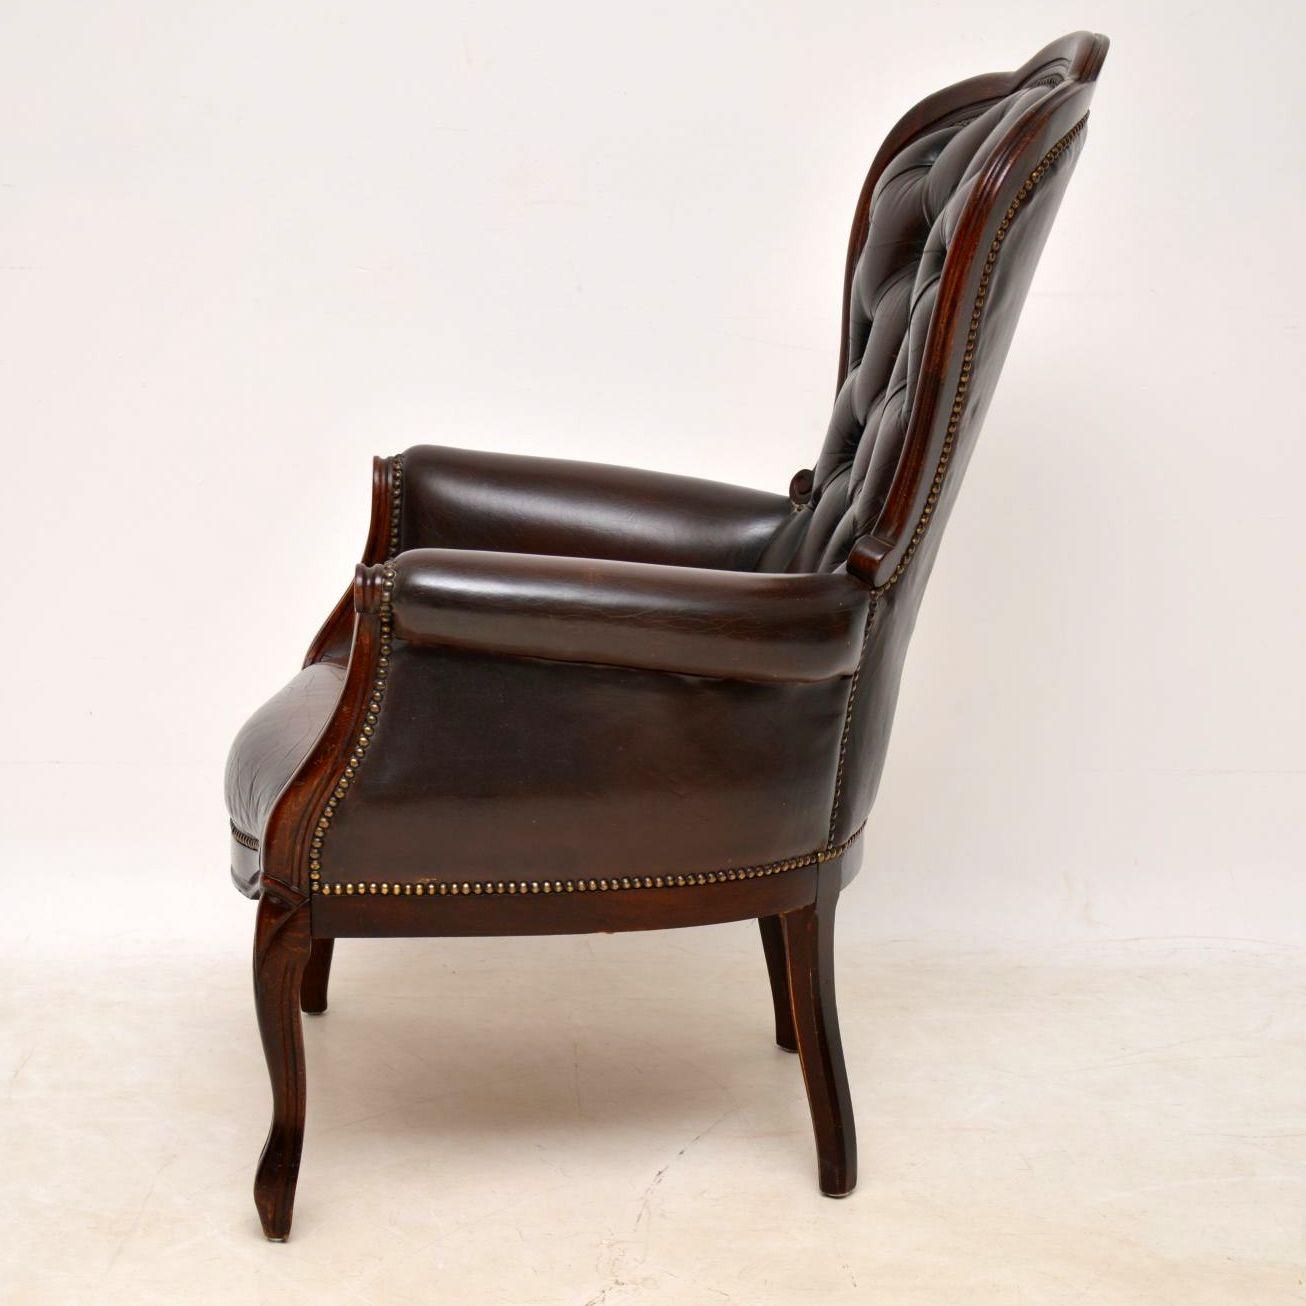 English Antique Victorian Style Leather and Mahogany Armchair